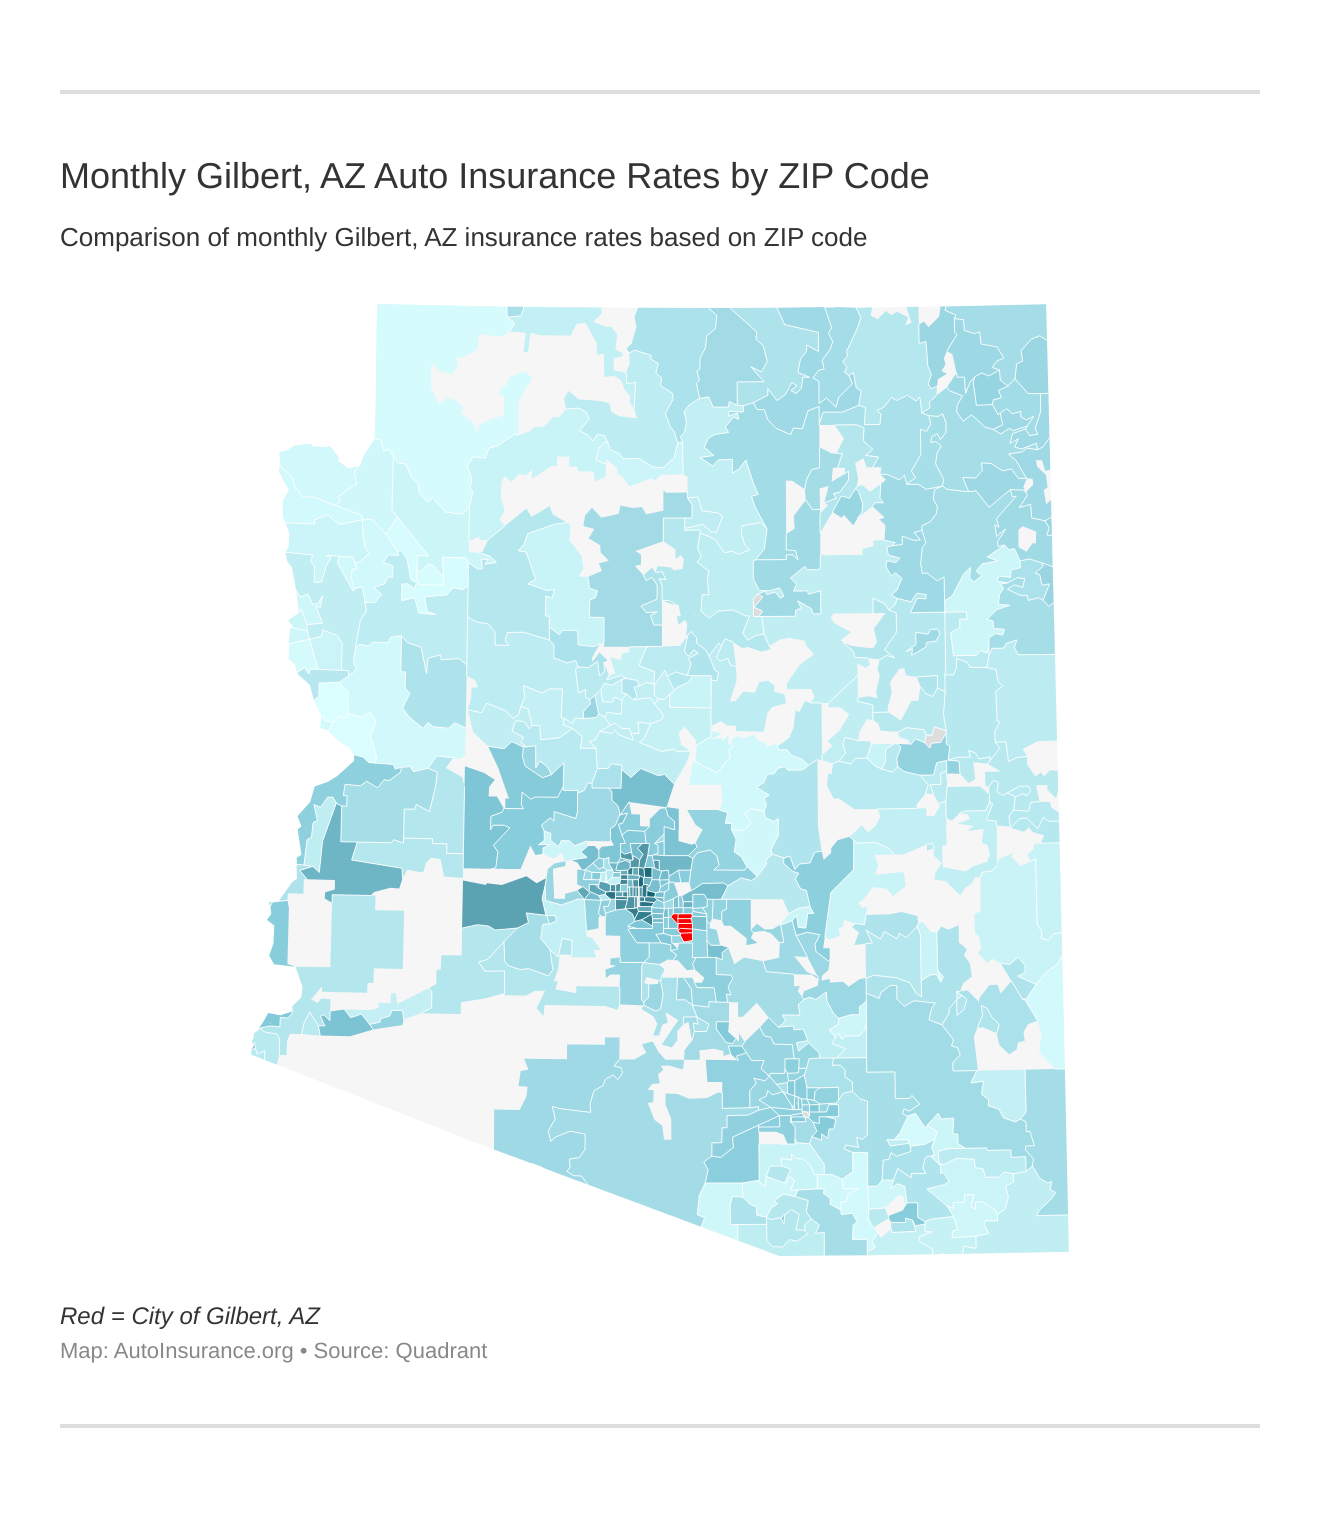 Monthly Gilbert, AZ Auto Insurance Rates by ZIP Code